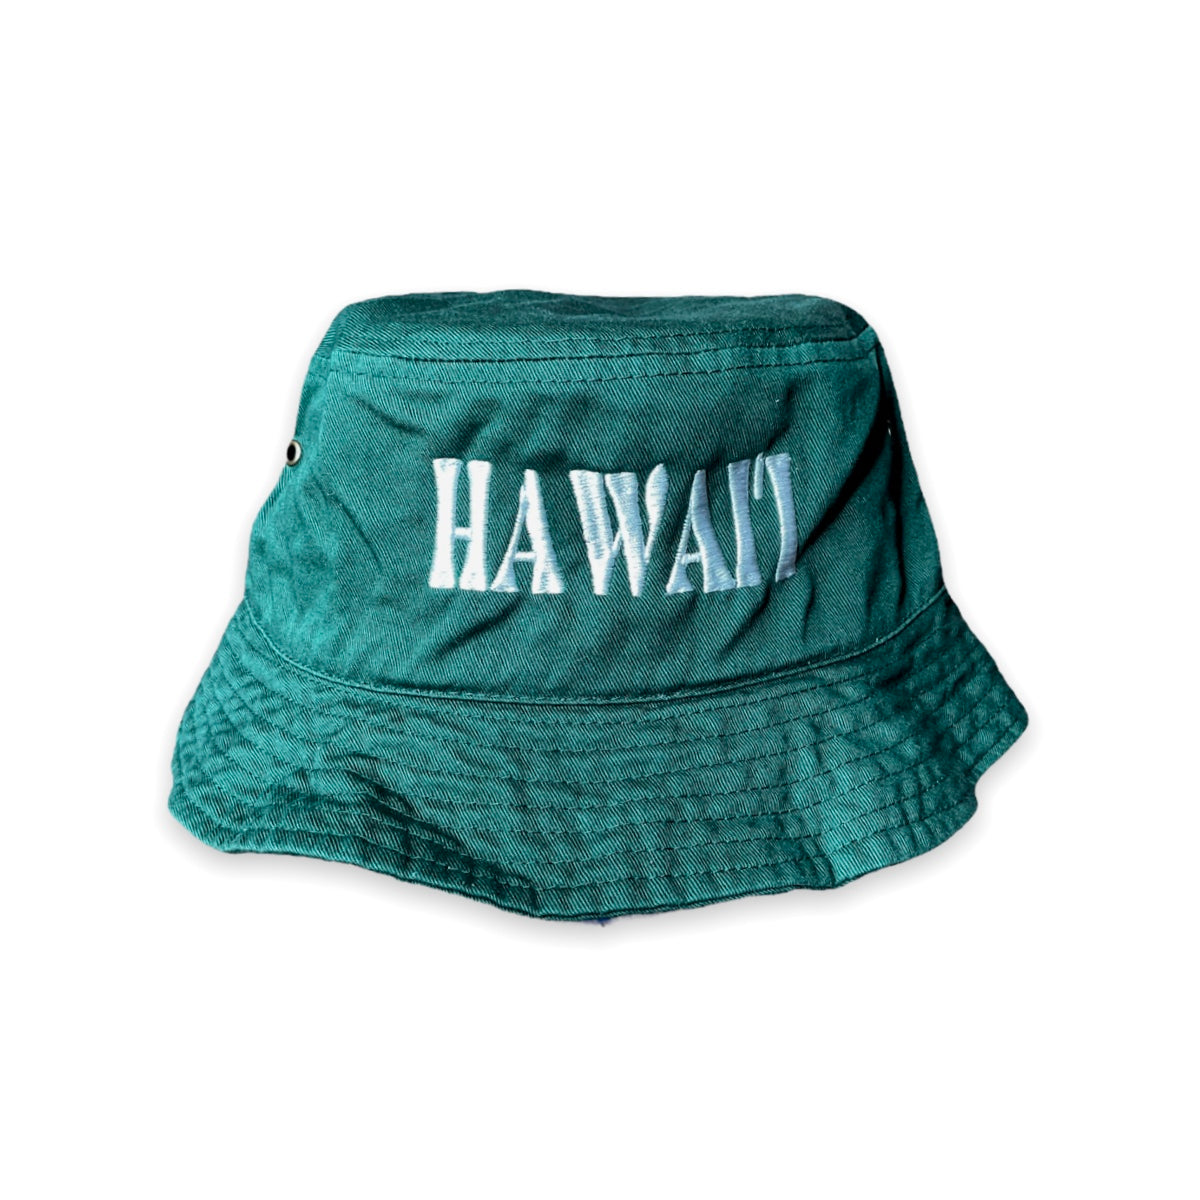 Hawaiʻi Embroidered Forest Green Bucket Hat